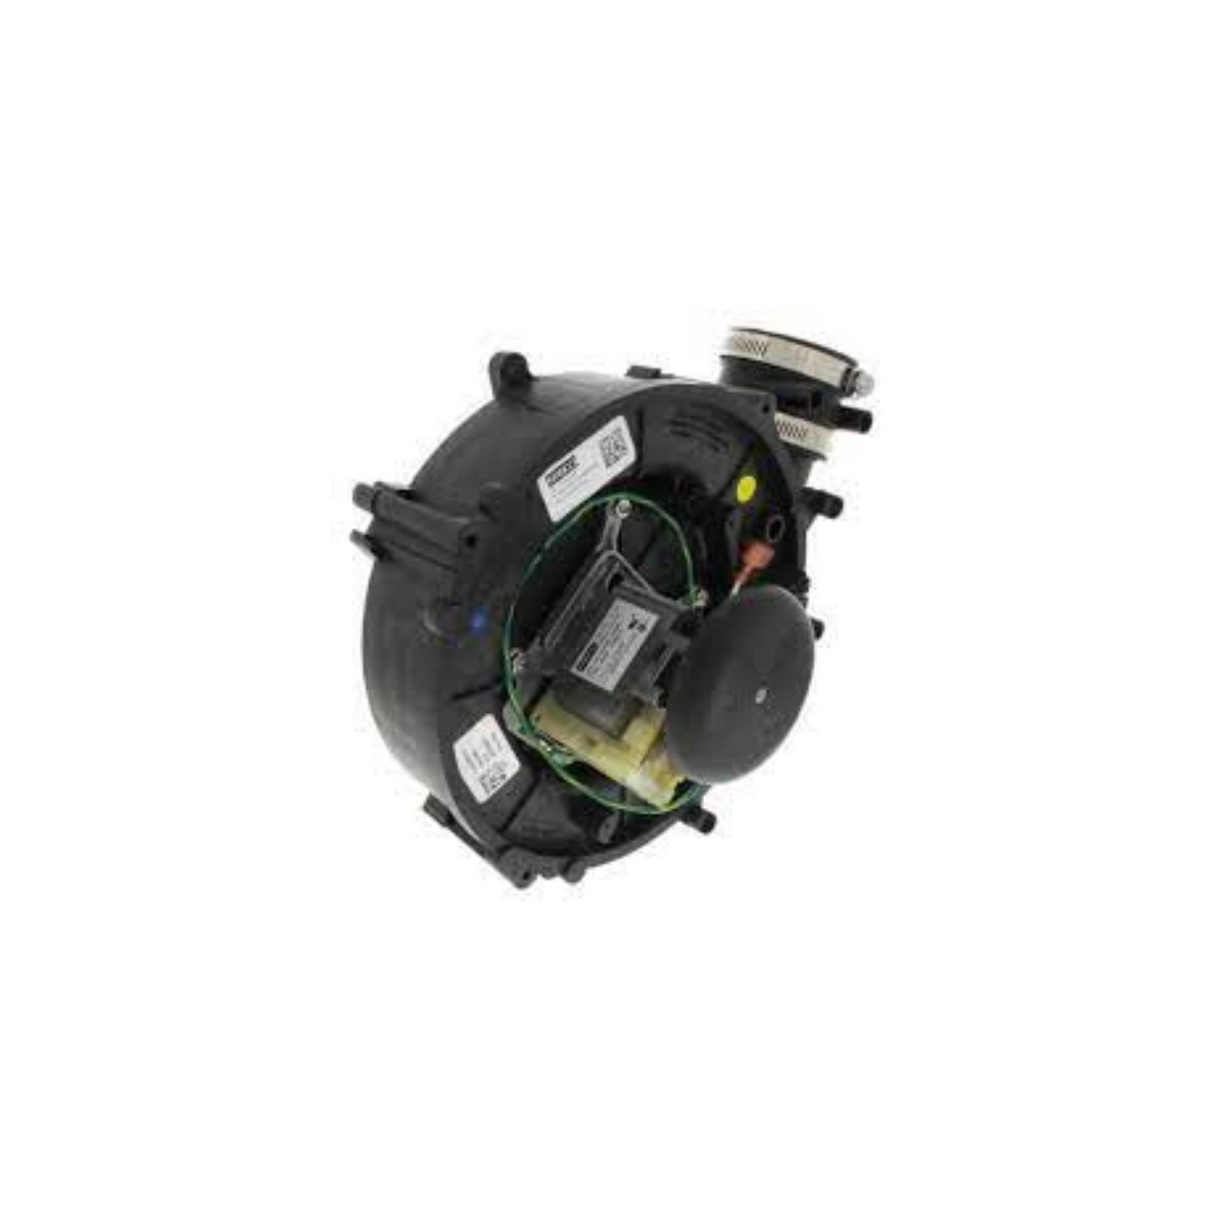 York S1-326-49692-000 Combustion Blower Motor